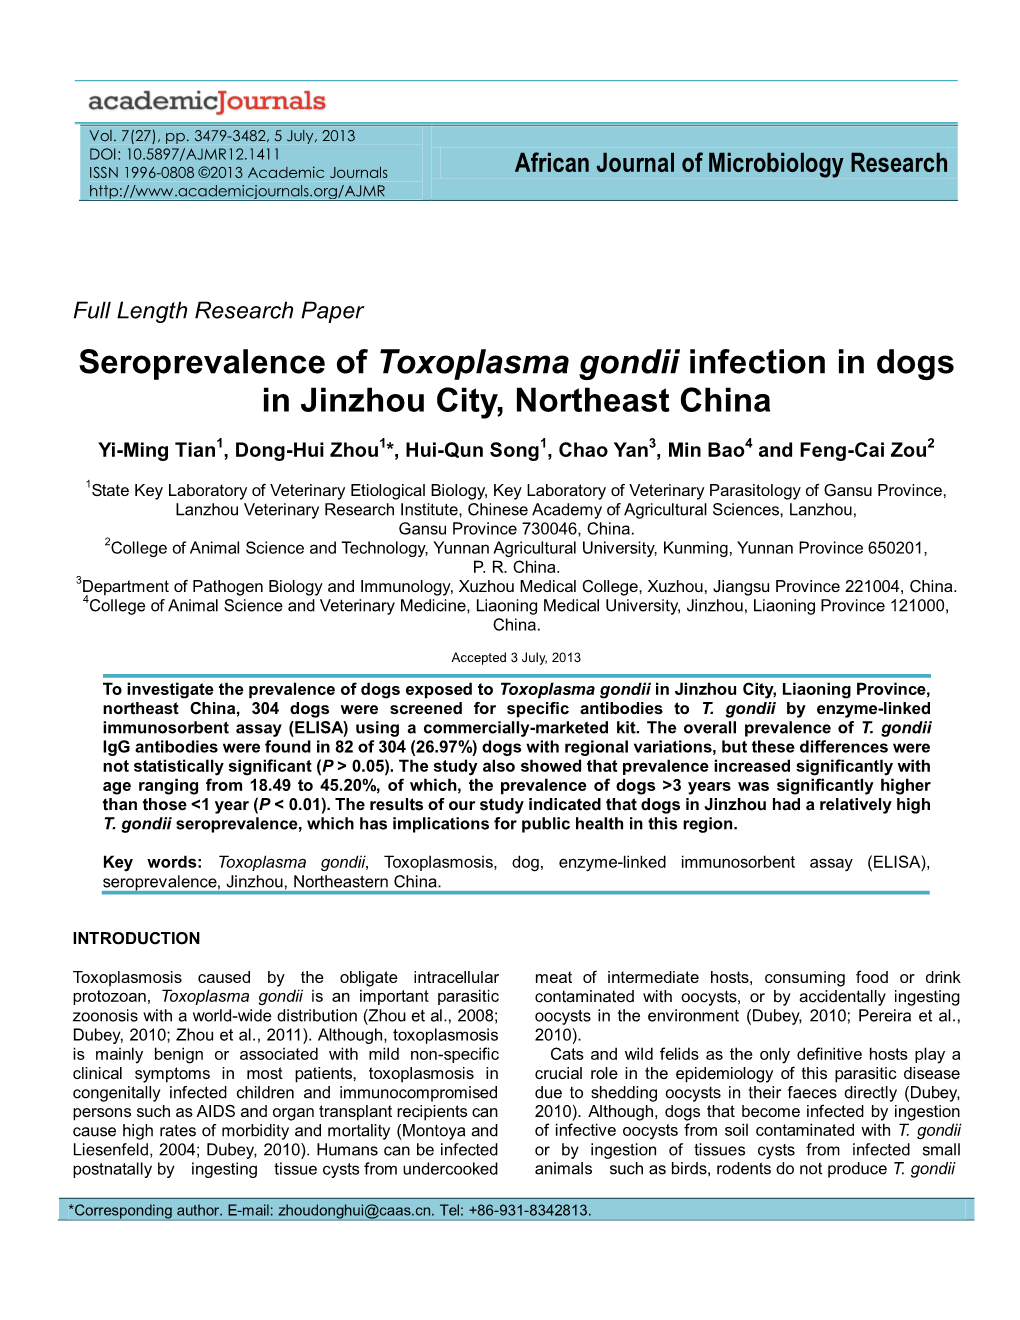 Seroprevalence of Toxoplasma Gondii Infection in Dogs in Jinzhou City, Northeast China